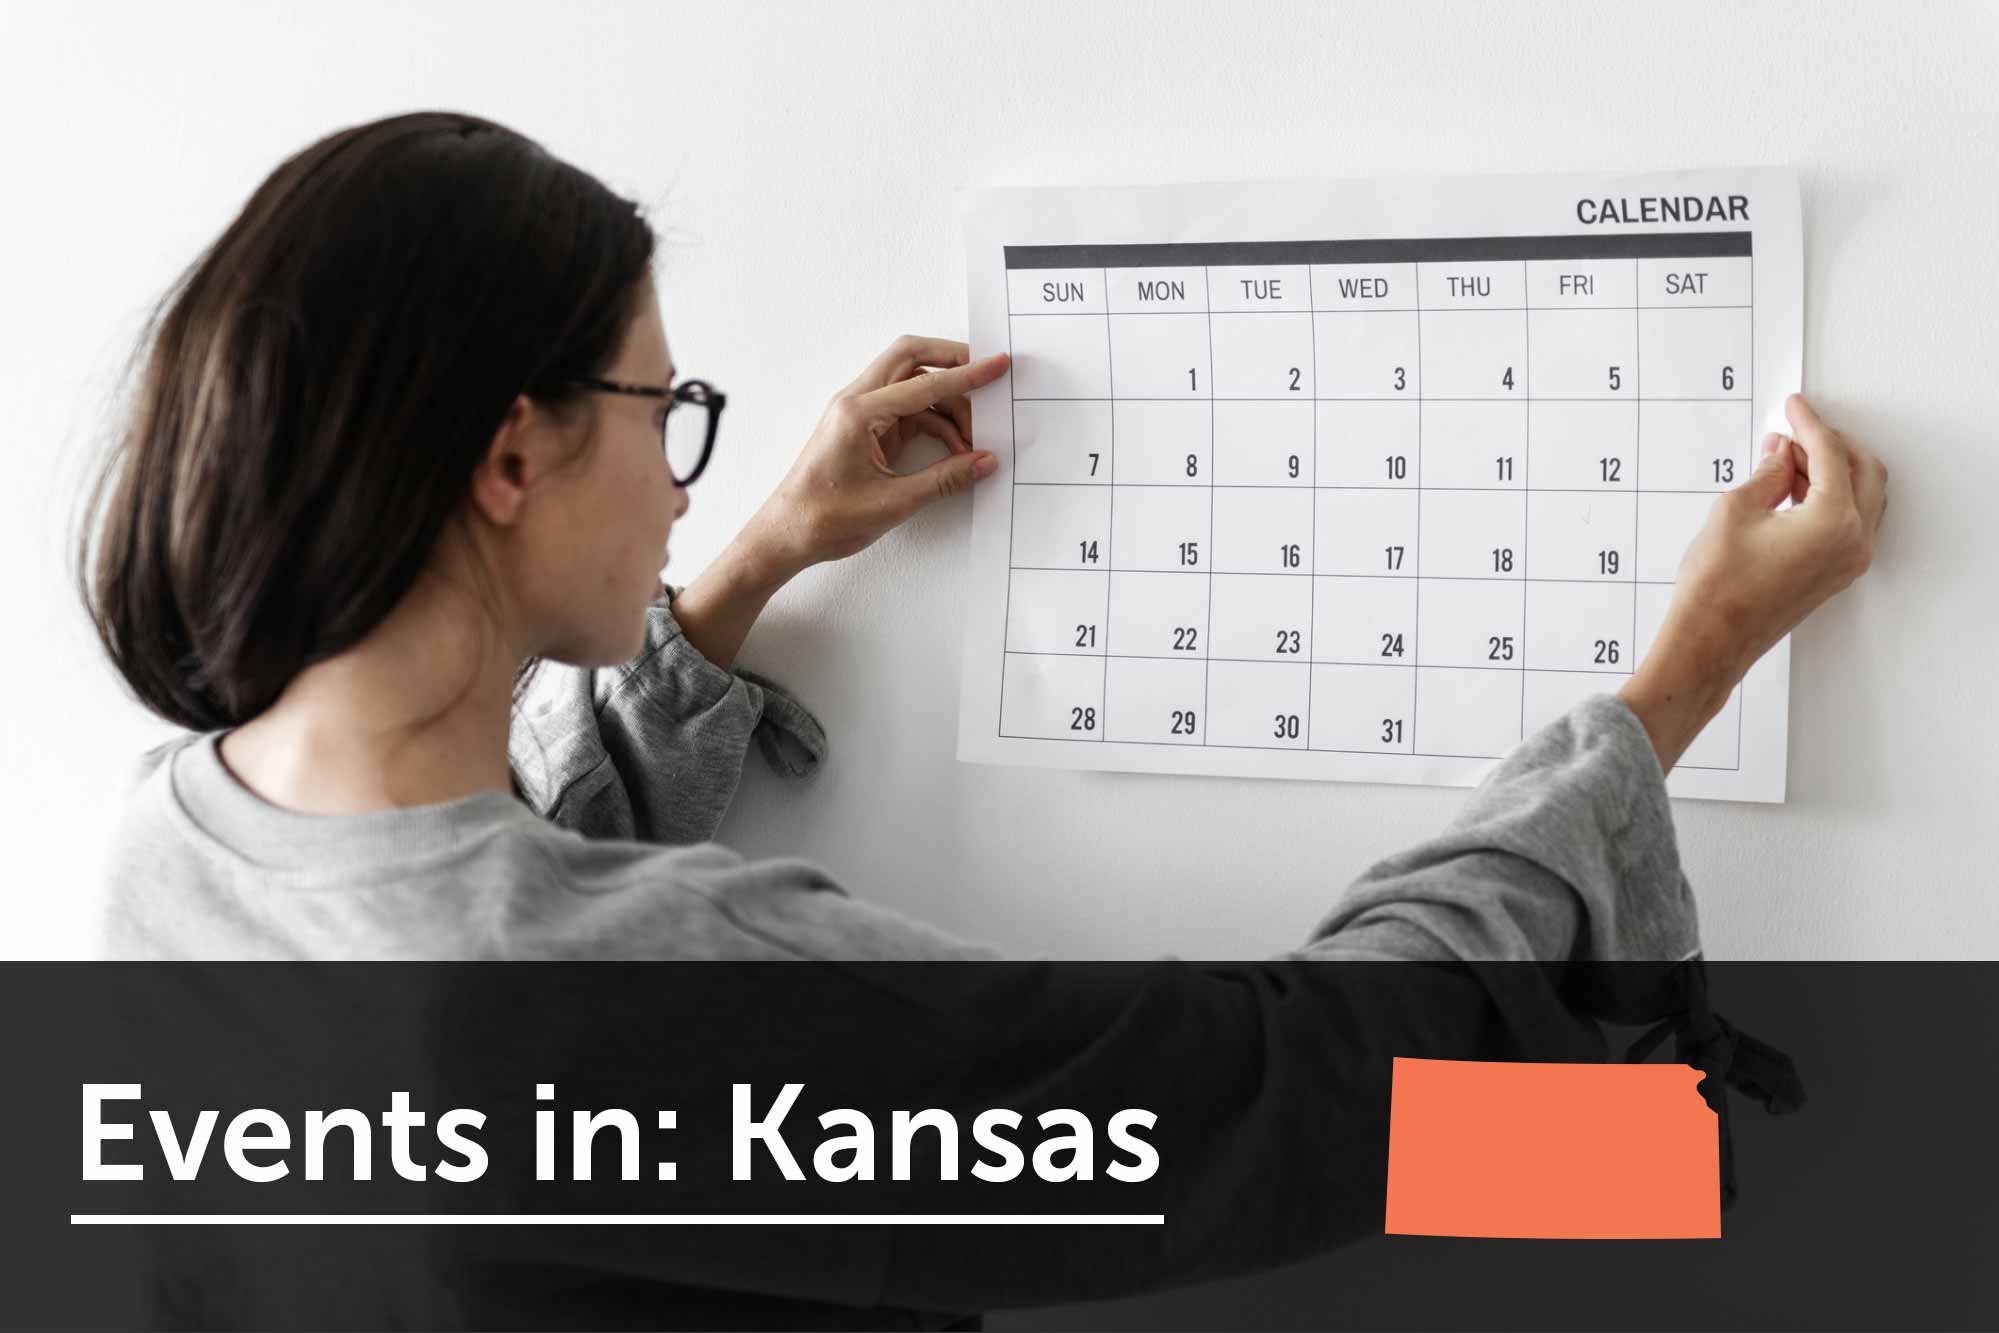 Women's business events in Kansas